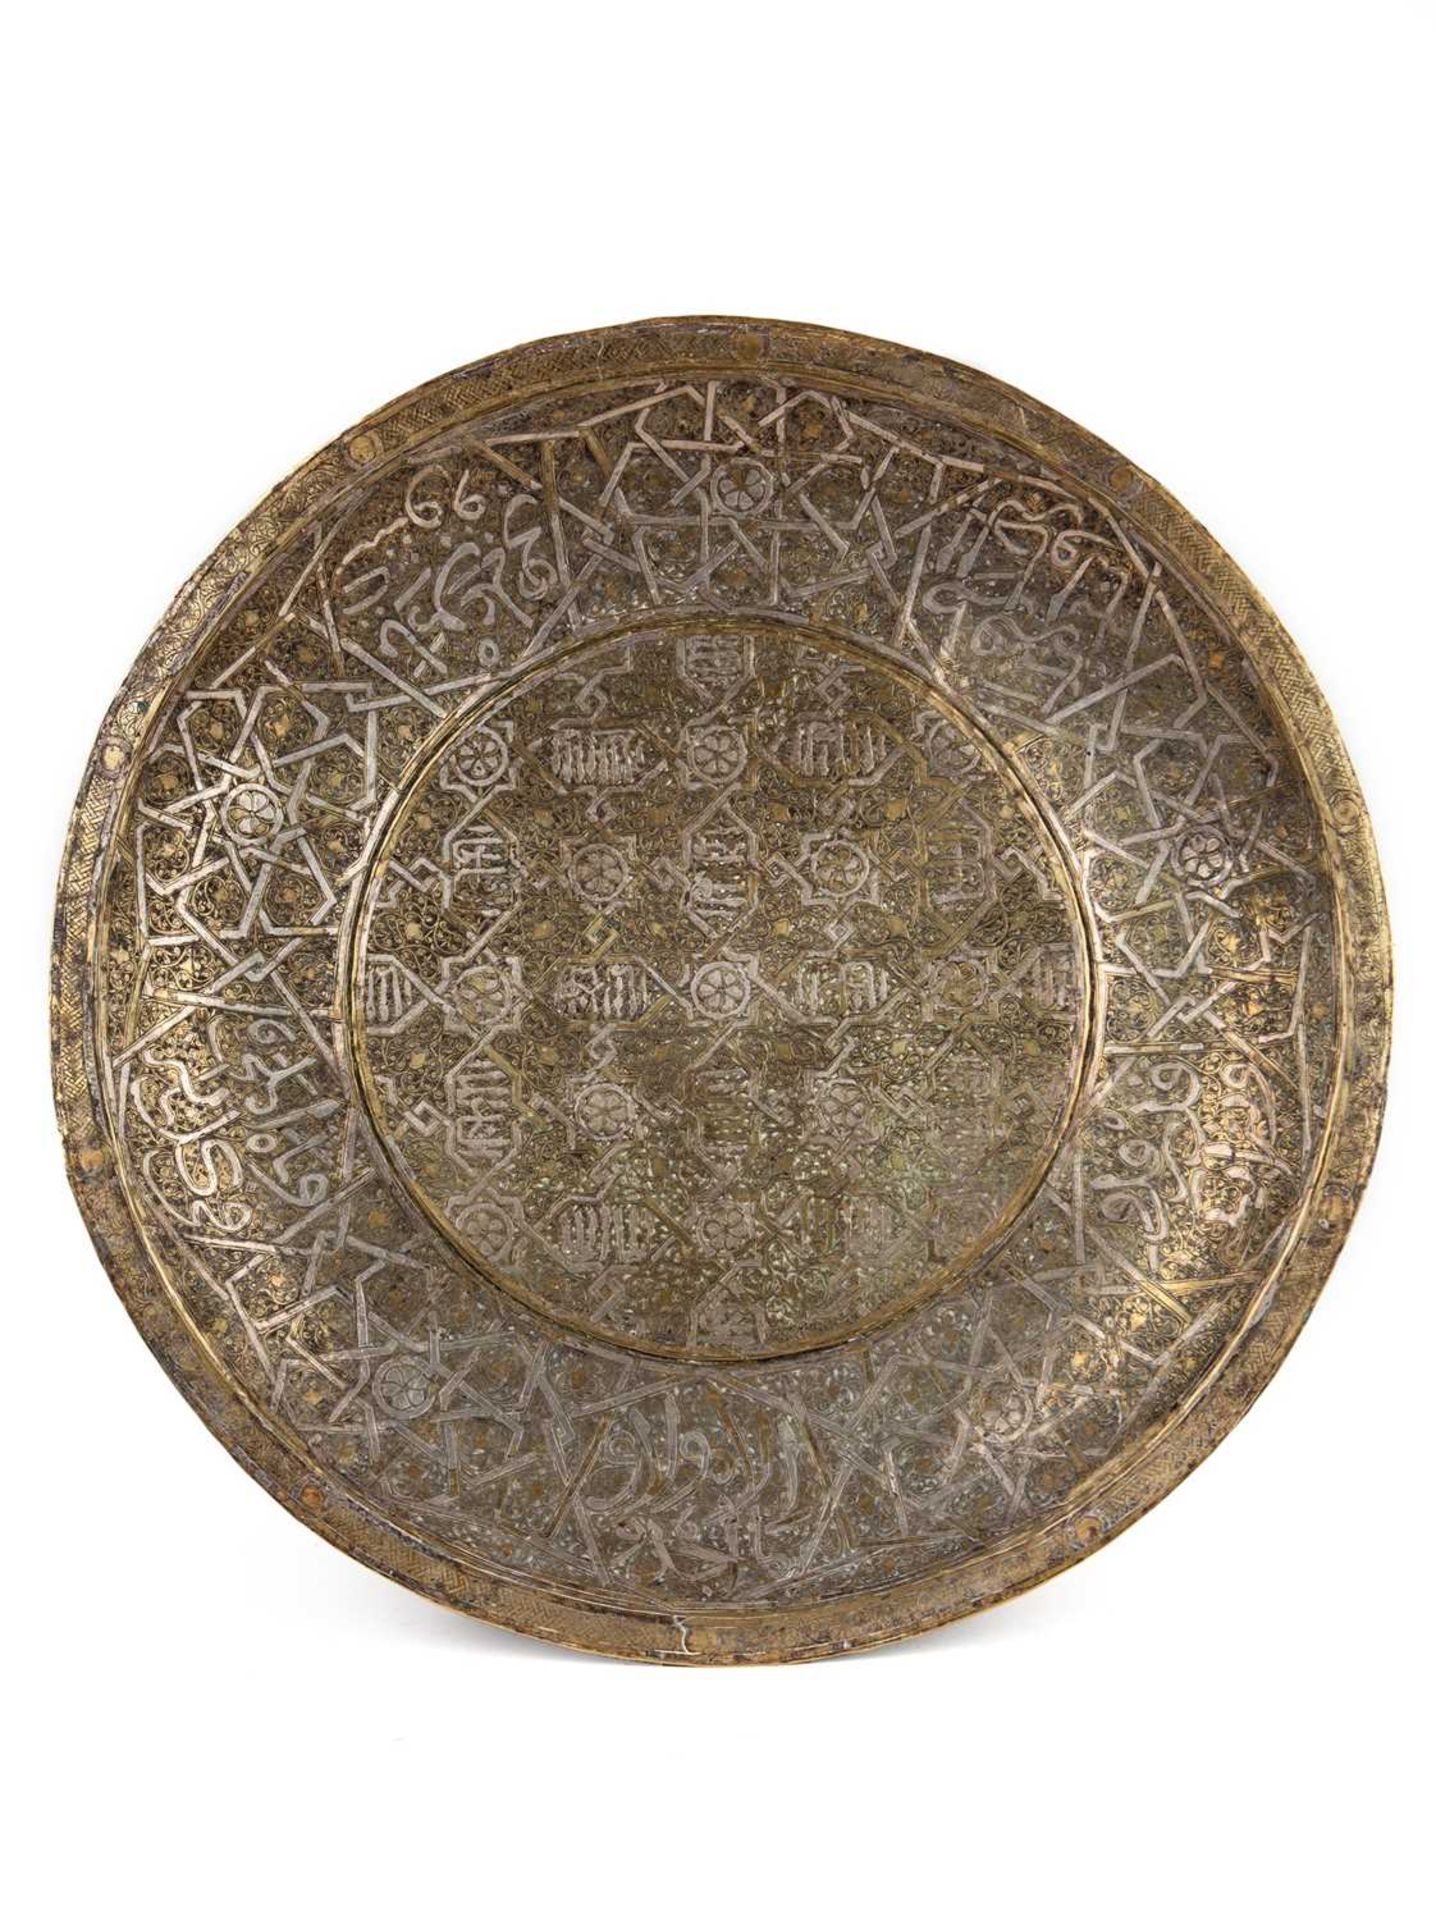 A LARGE 18TH SILVER AND COPPER INLAID TRAY, EGYPT OR SYRIA